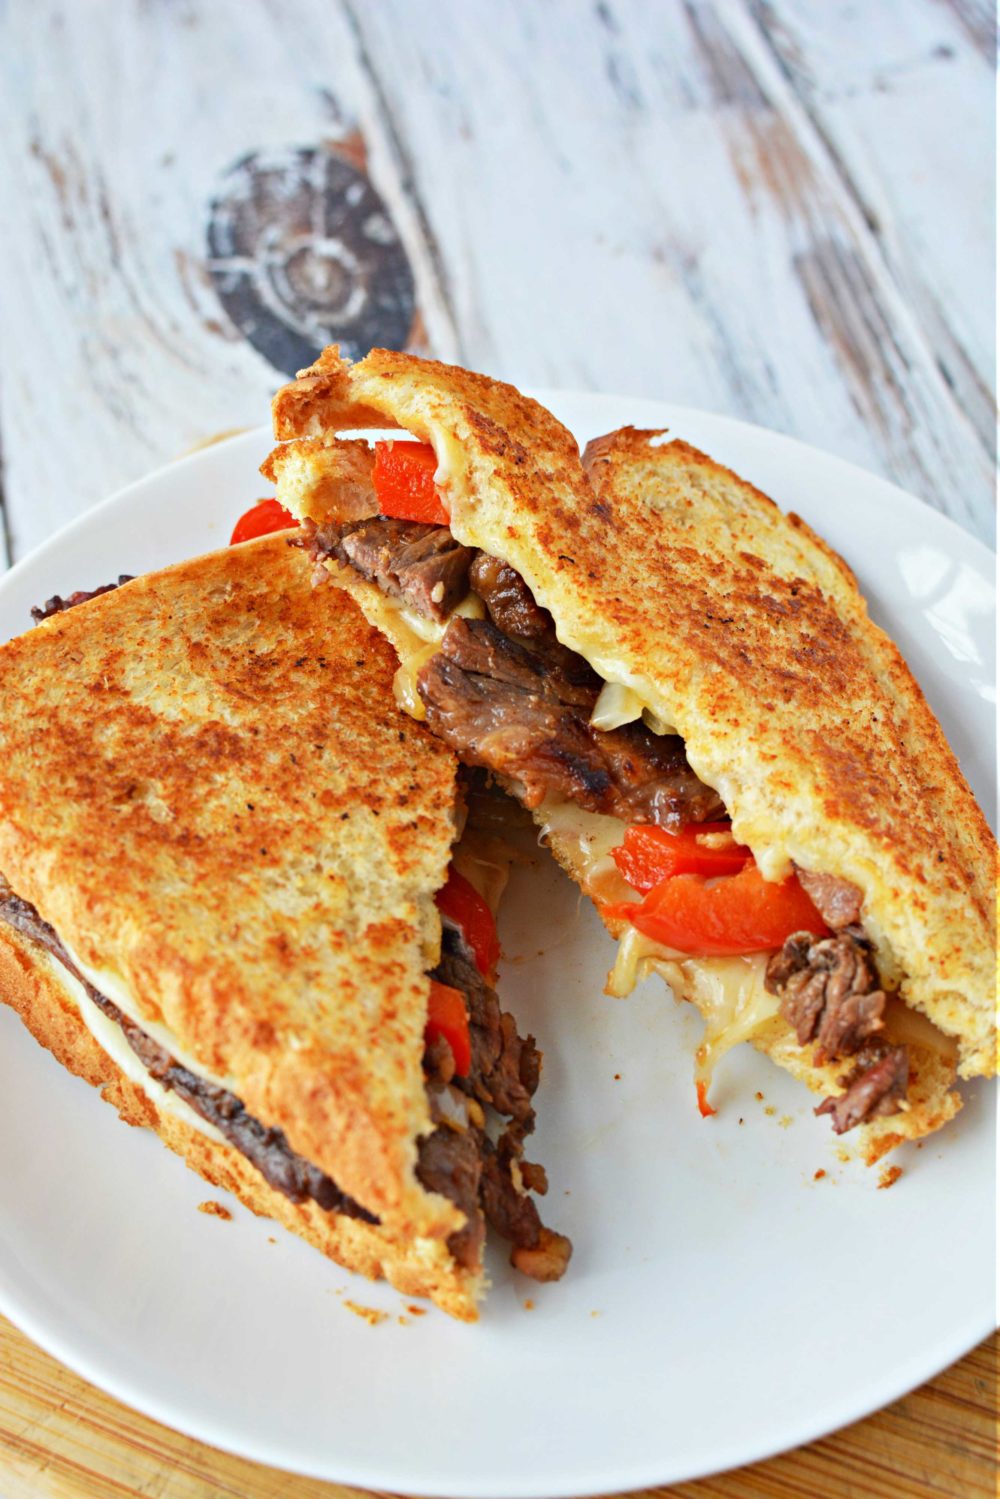 Philly cheesesteak grilled cheese with onion, red bell peppers, hot sauce and provolone cheese